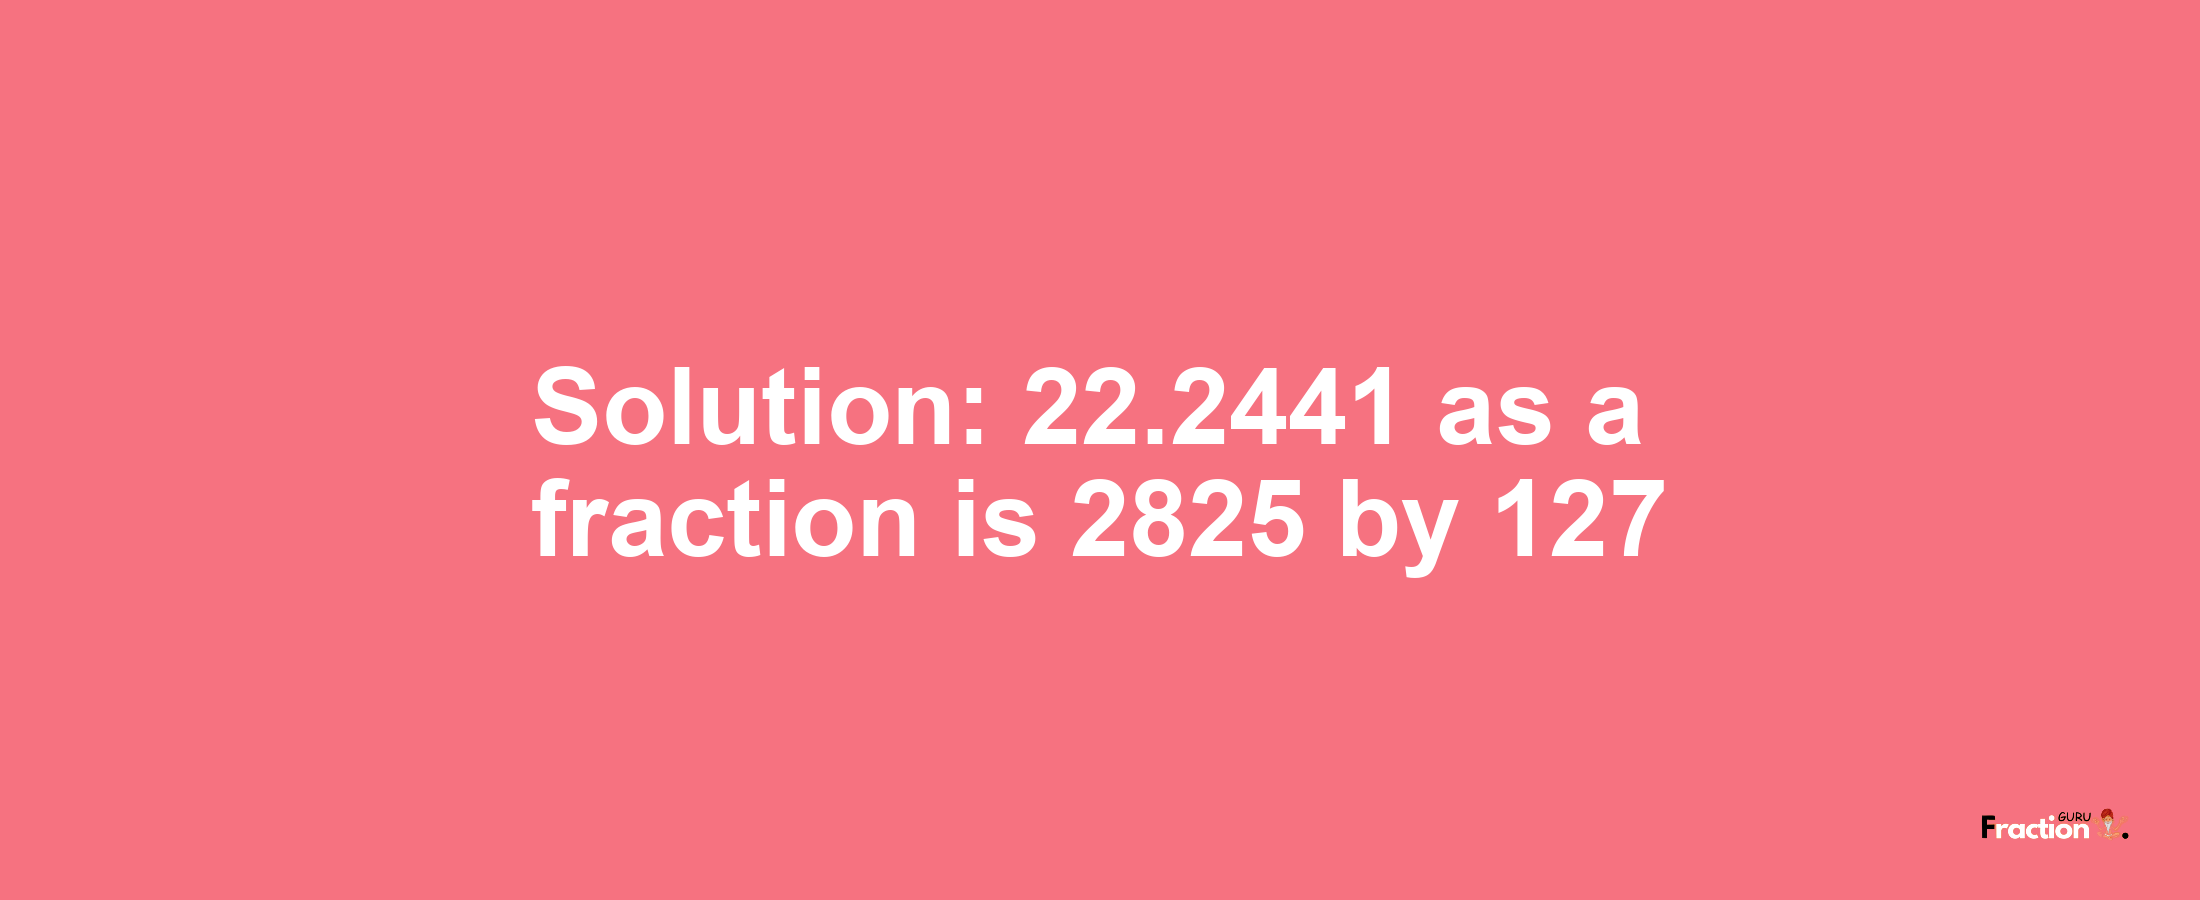 Solution:22.2441 as a fraction is 2825/127